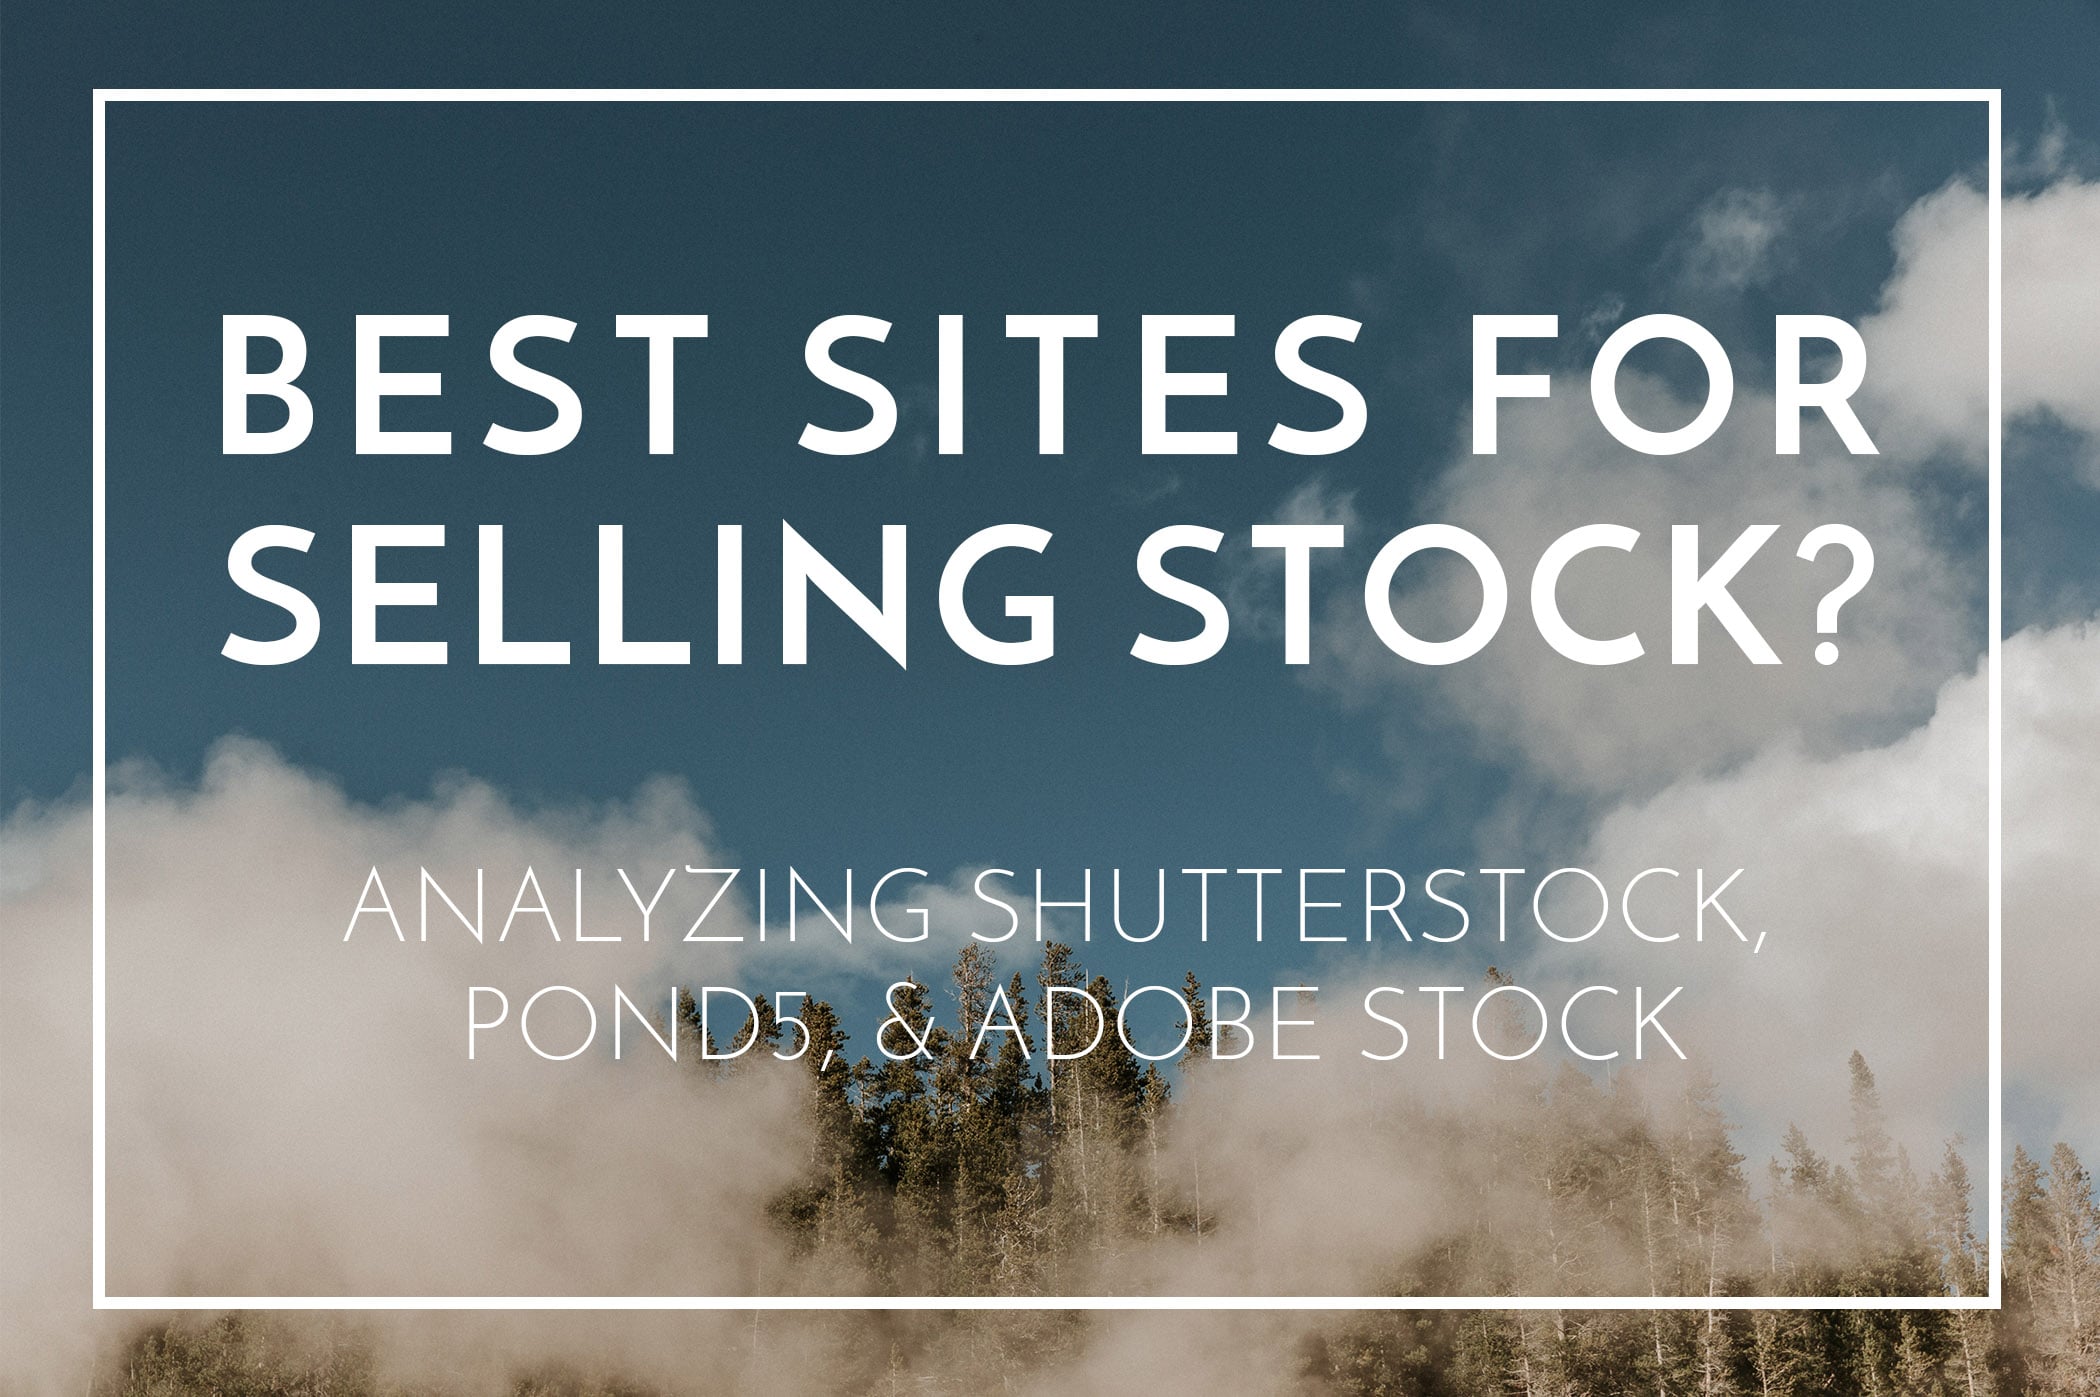 Best sites for selling stock photos: Shutterstock, Pond5, or Adobe Stock?